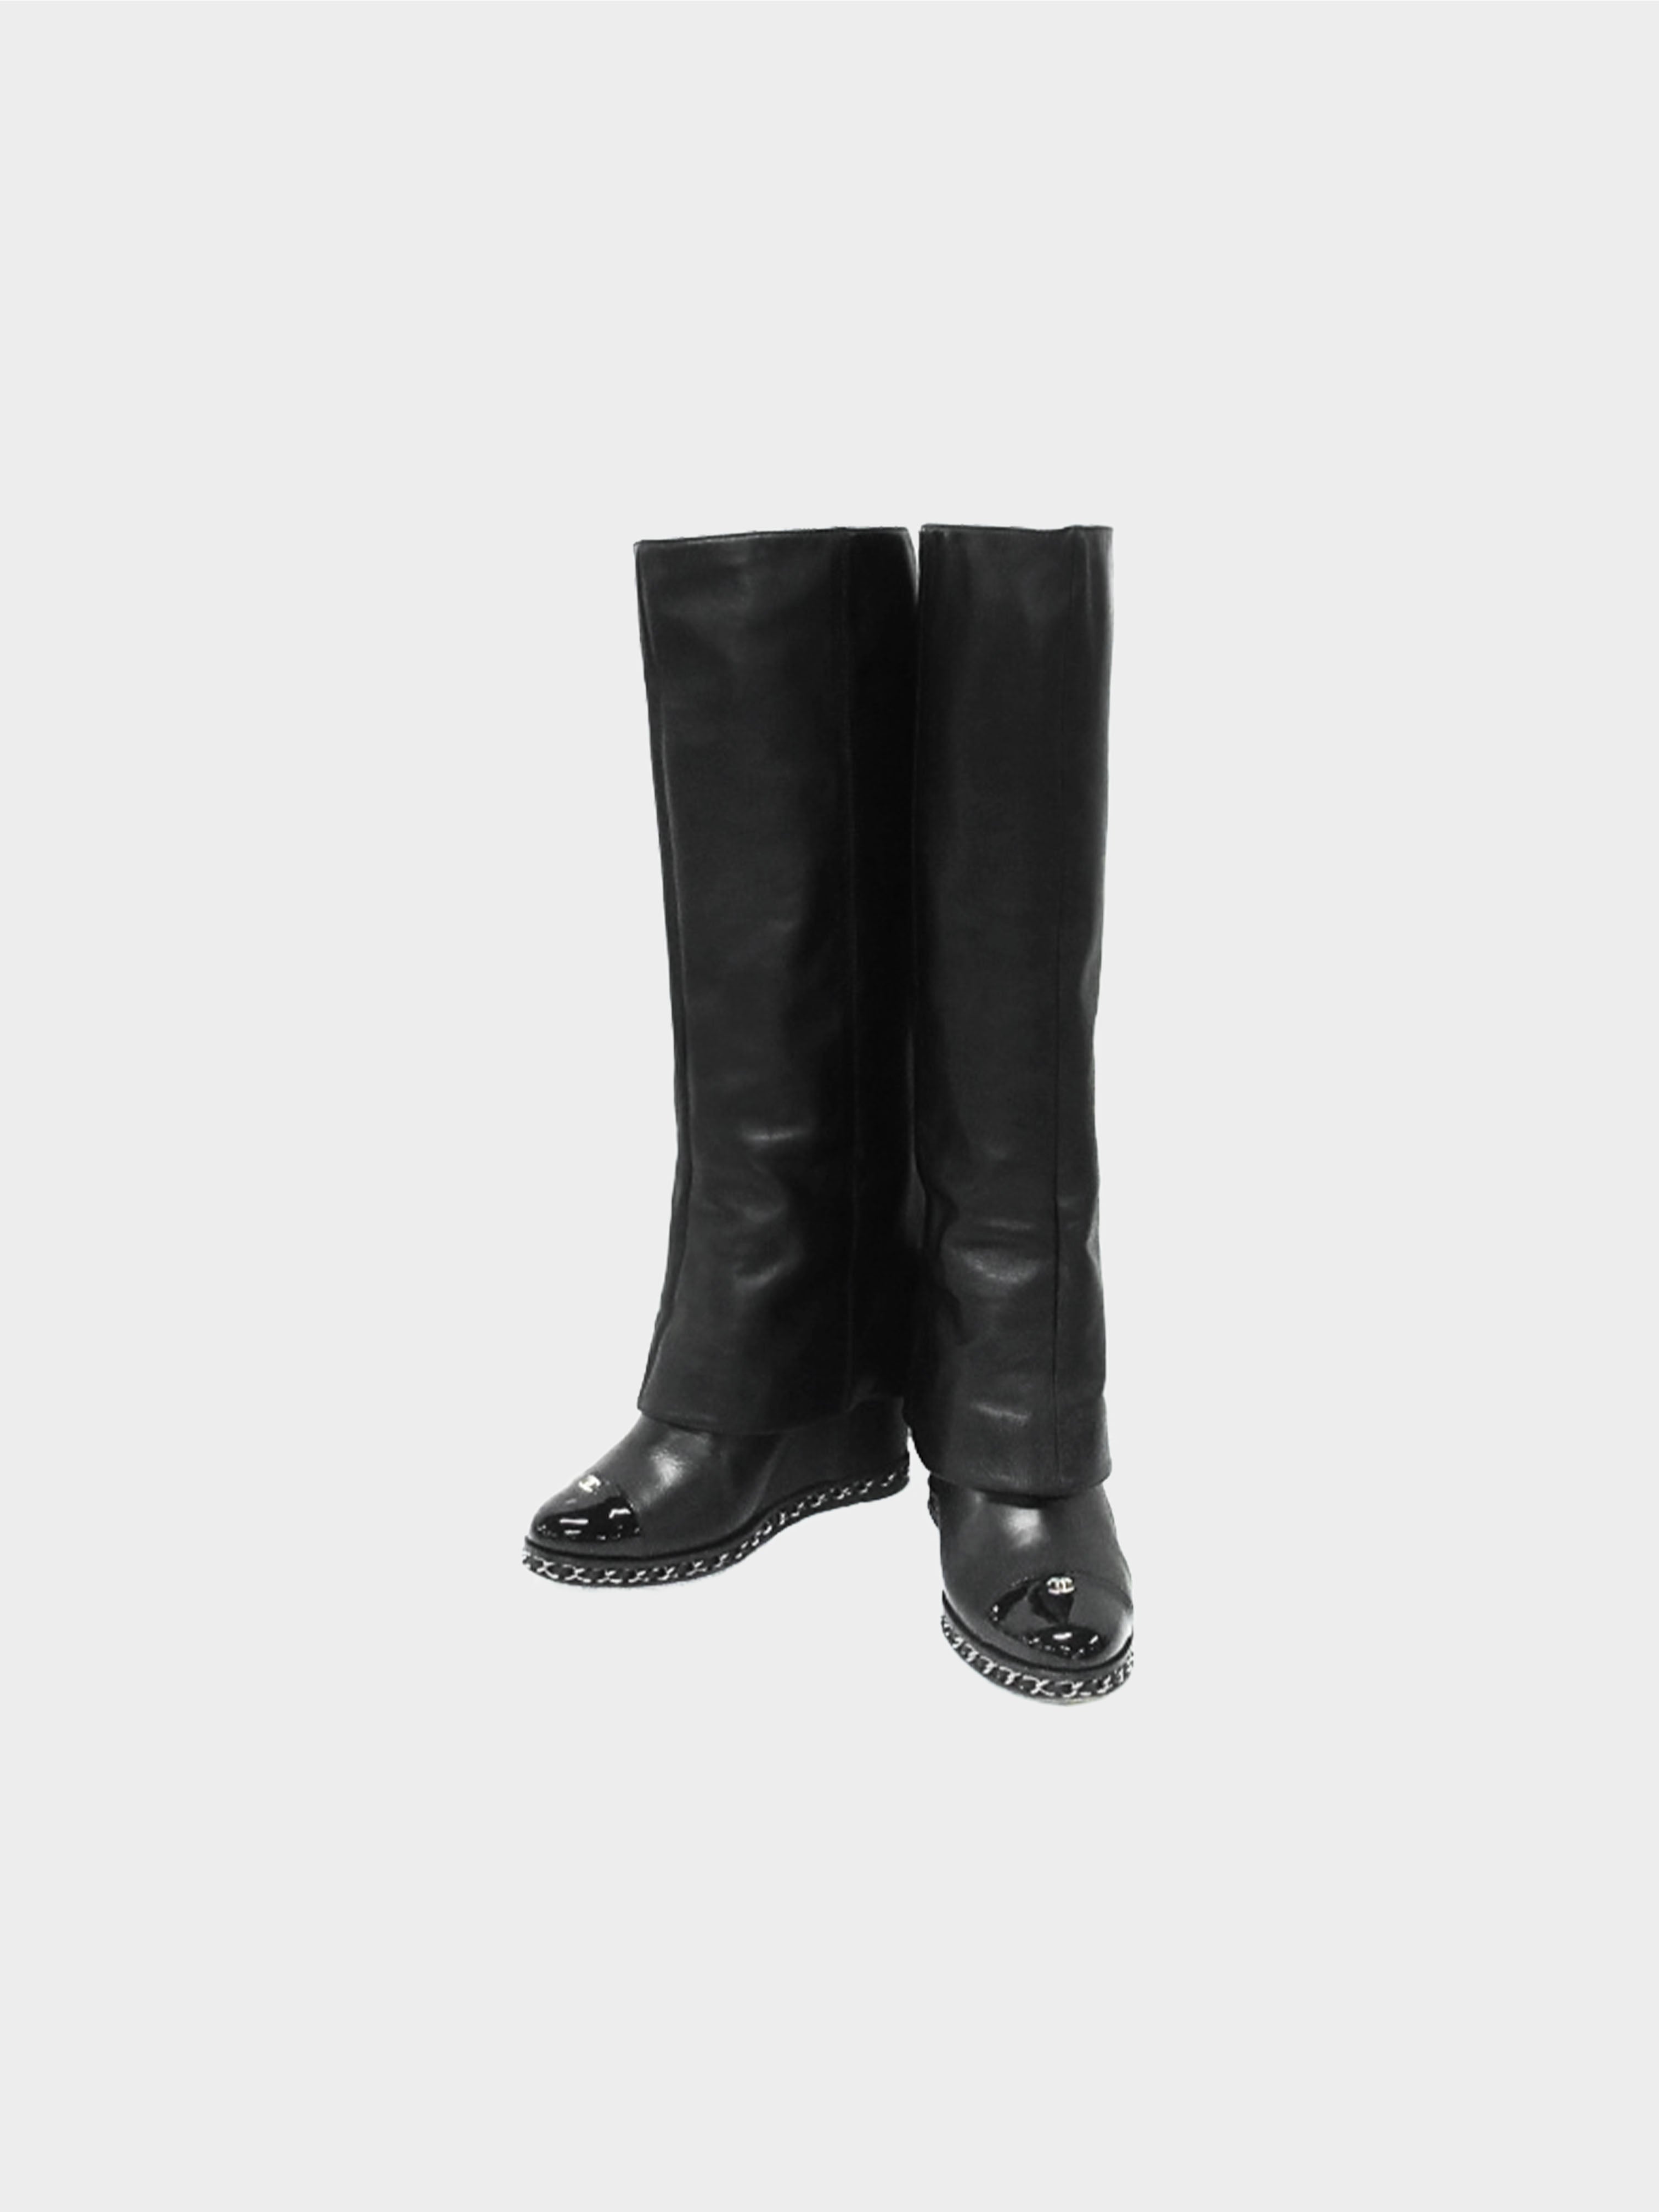 Chanel 2010s Black Leather Fold-over Wedged Long Boots